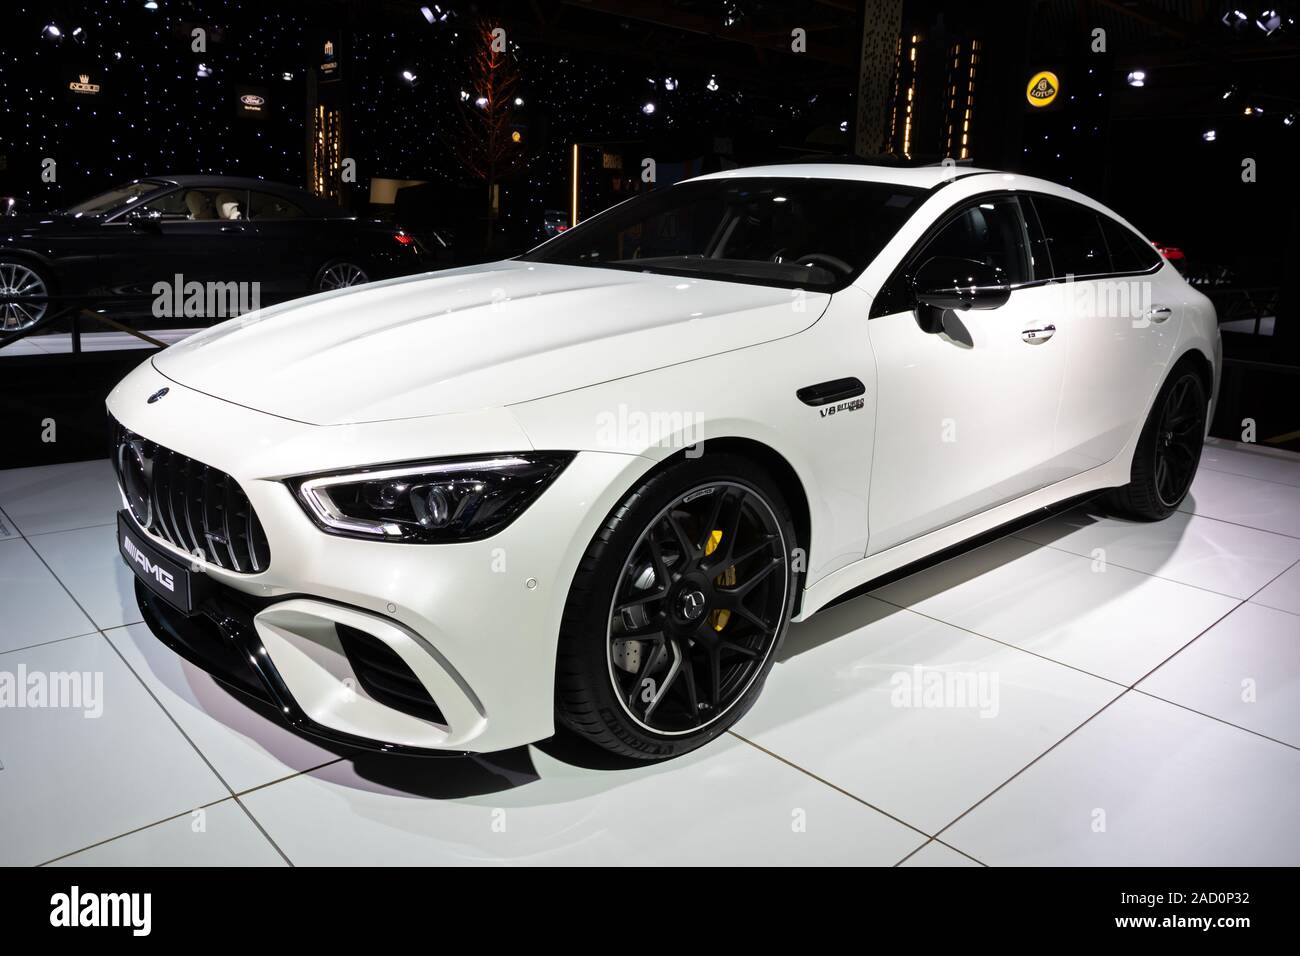 BRUSSELS - JAN 18, 2019: Mercedes-AMG GT 63 S sports car showcased at the Brussels Autosalon 2019 Motor Show. Stock Photo